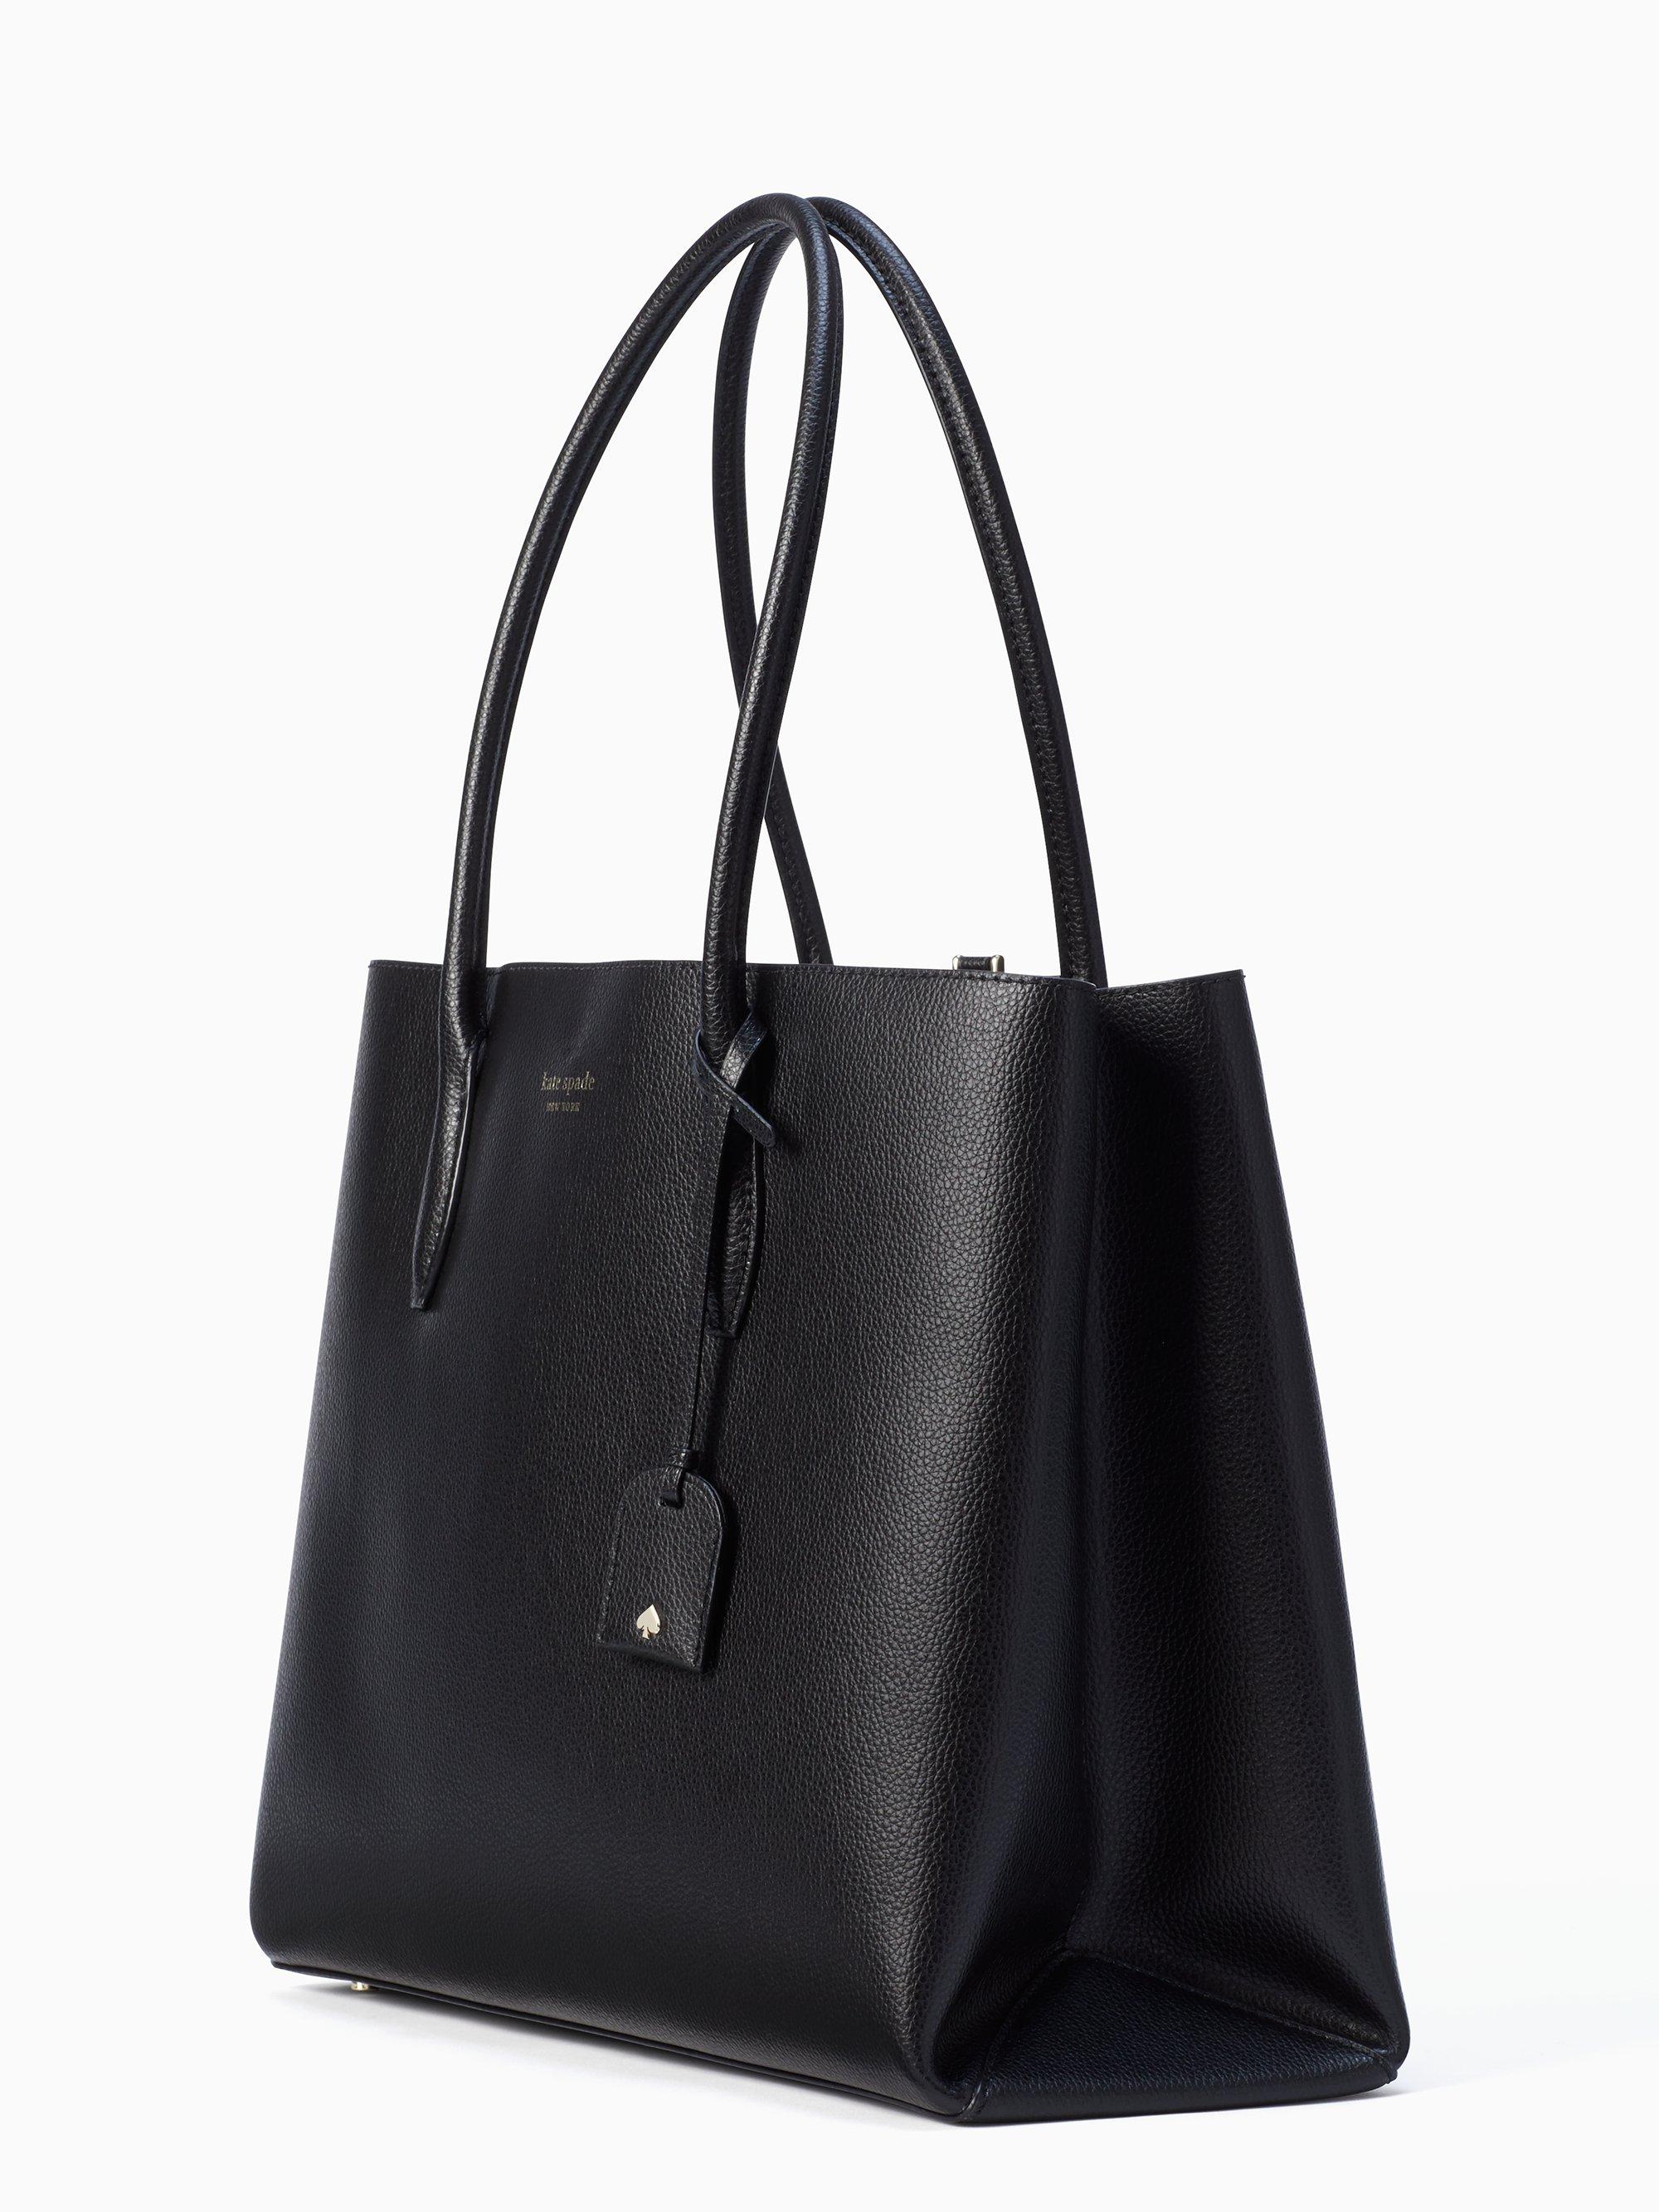 Kate Spade Leather Eva Large Tote in Black - Lyst